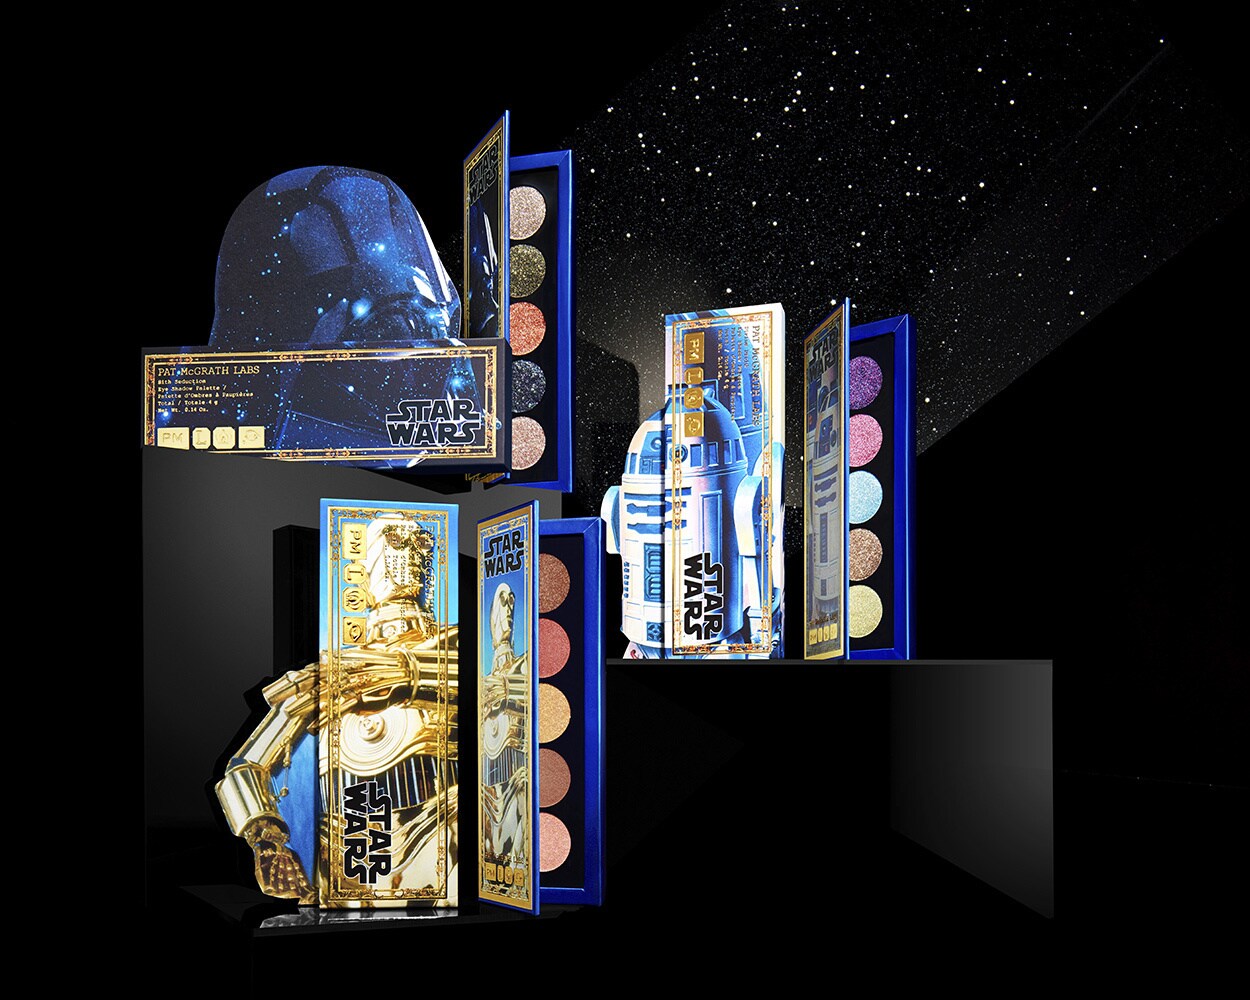 Three collections of Star Wars Makeup by Pat McGrath